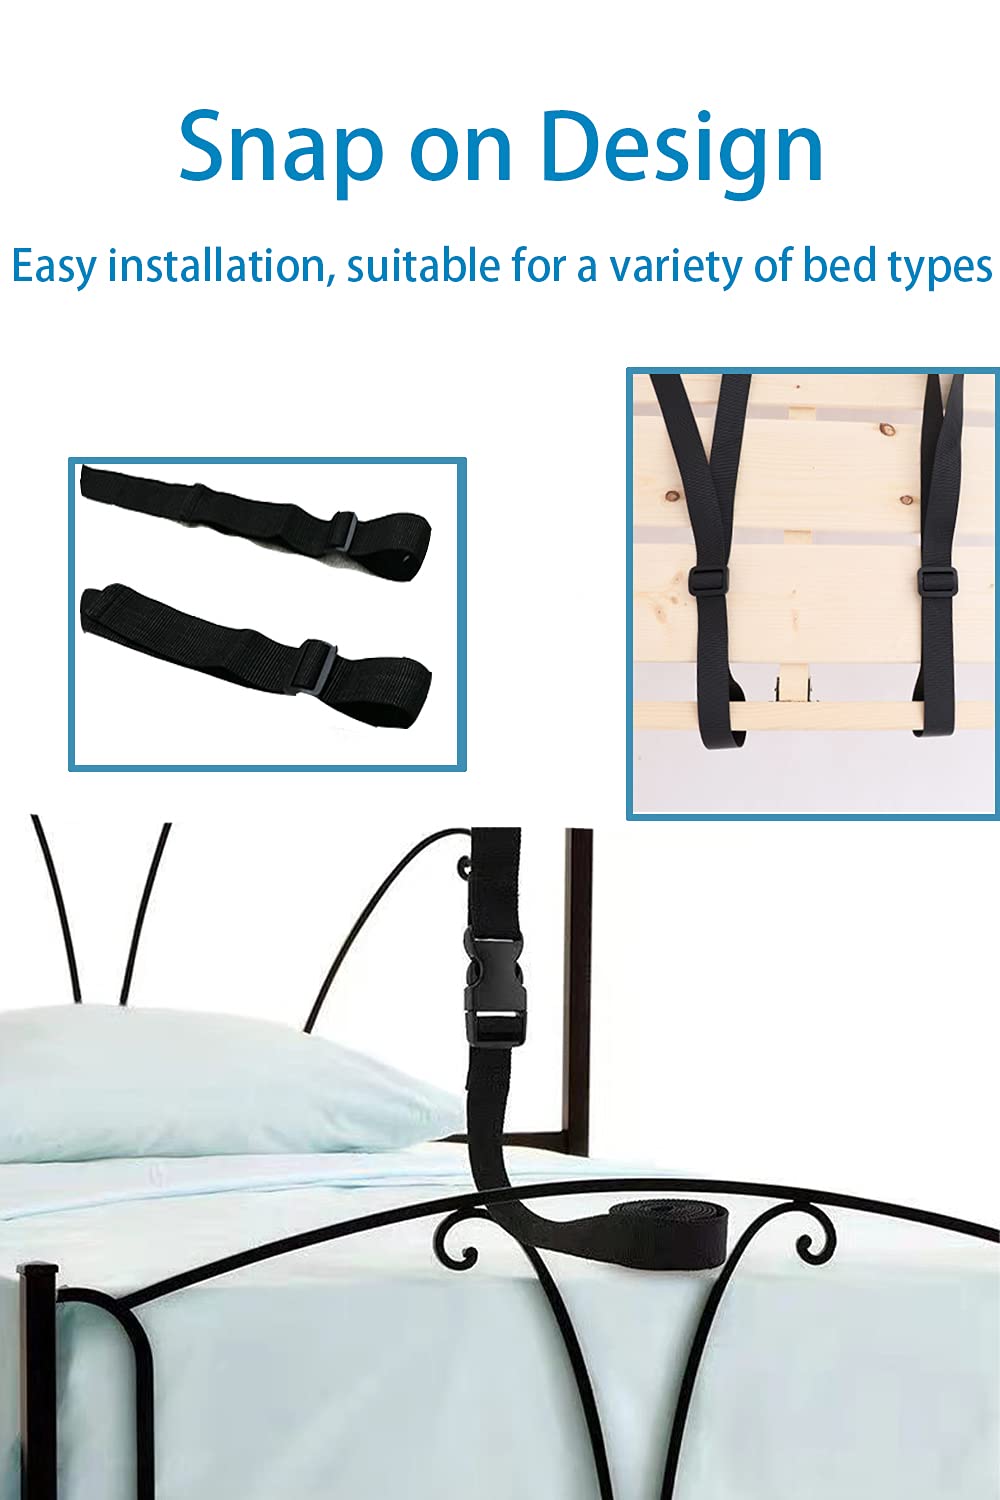 Healthman Bed Ladder Assist with Hard Handle ,Sit Up Helper with Adjustable Length-Pull Up Rope Ladder (Three Handle)